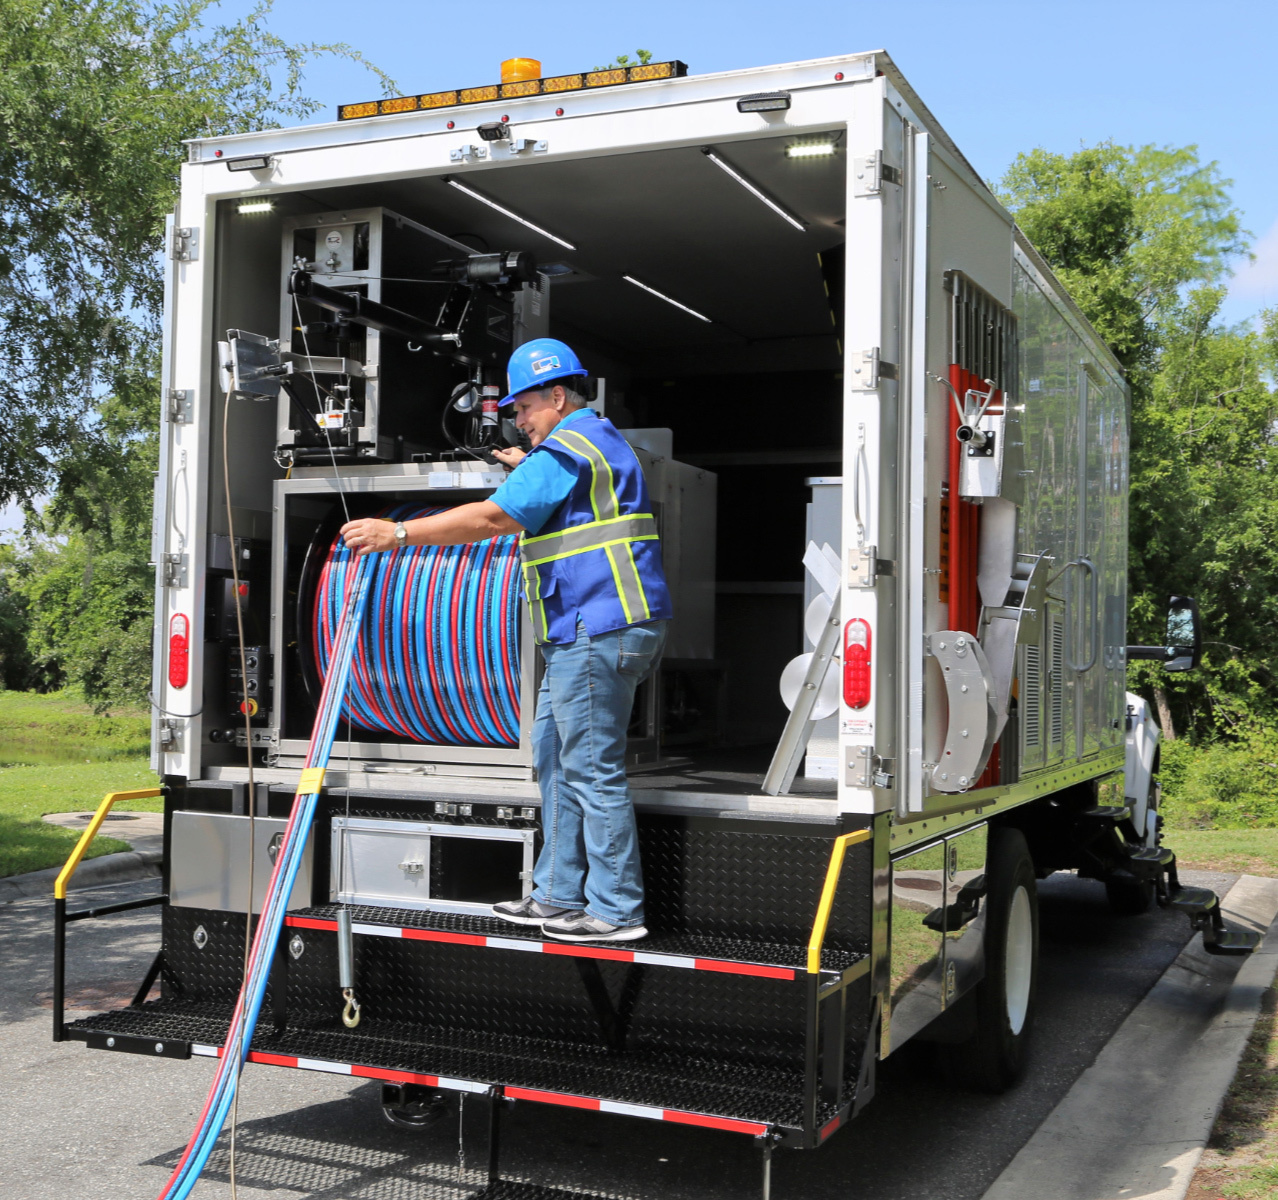 Product Focus - June 2020  Municipal Sewer and Water